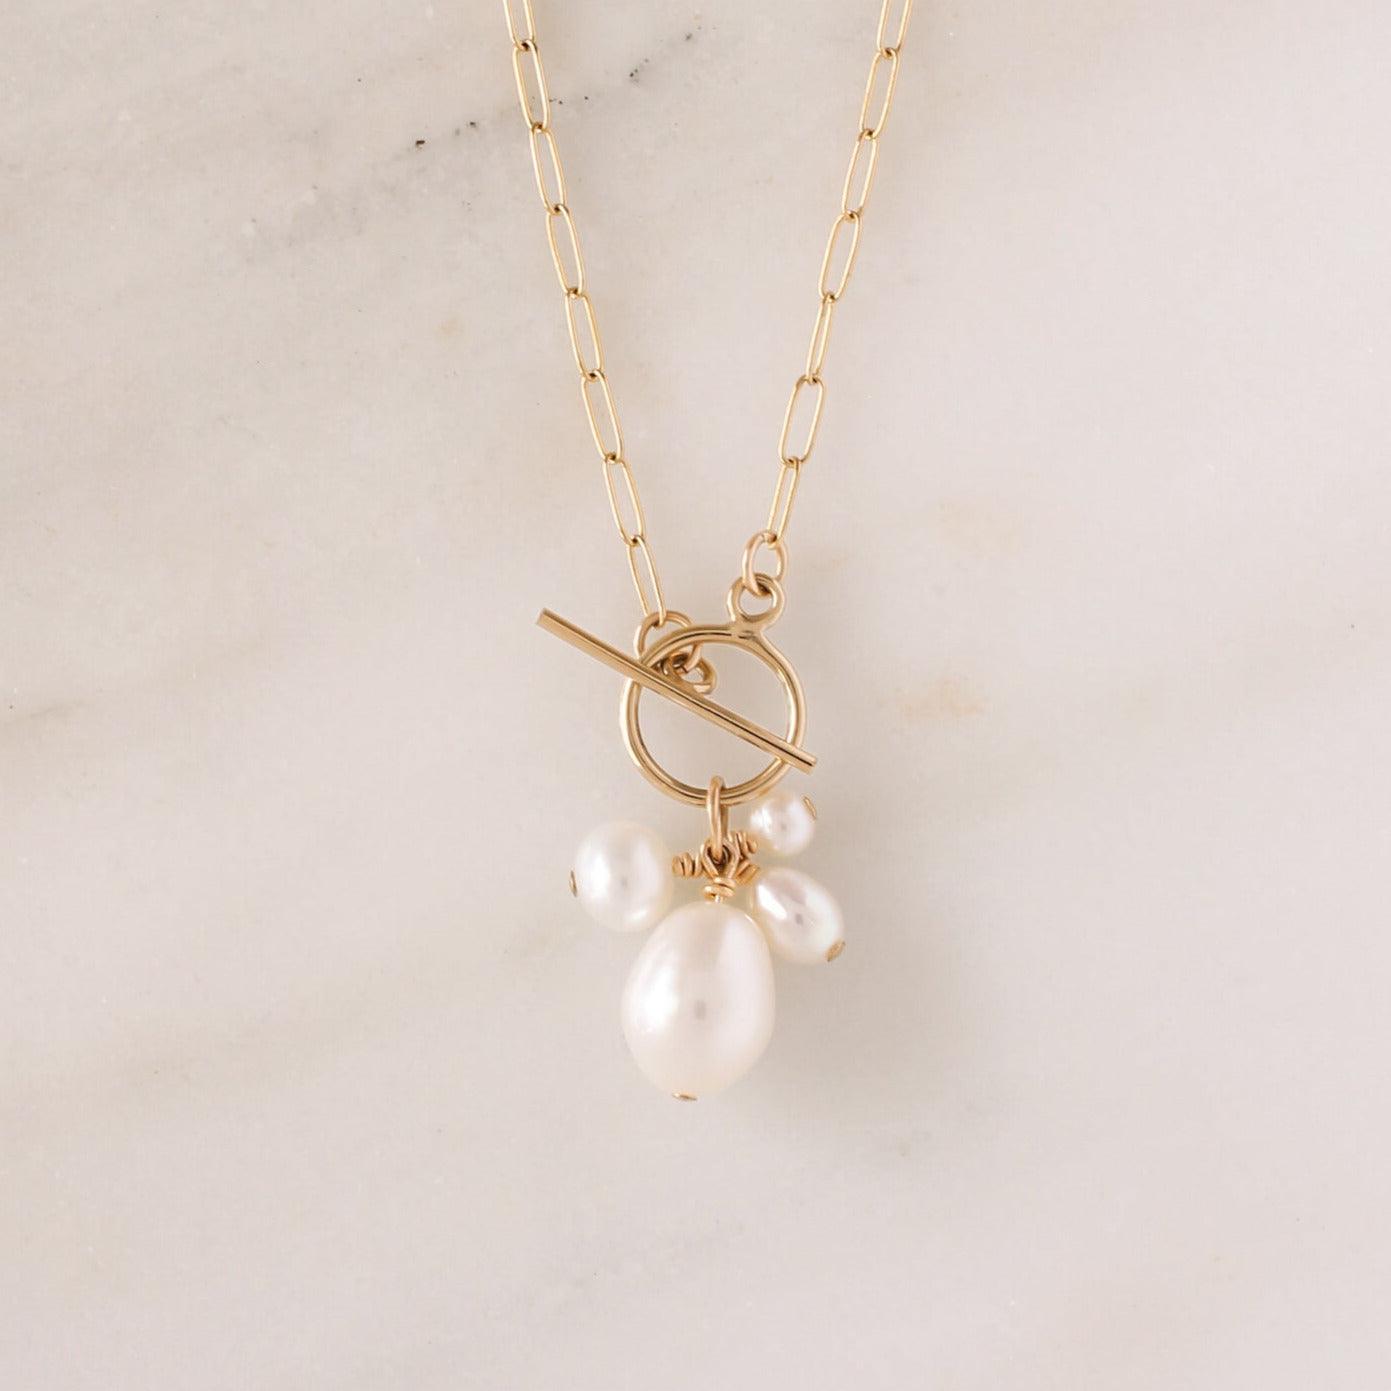 Verona Pearl Necklace - Nolia Jewelry - Meaningful + Sustainably Handcrafted Jewelry